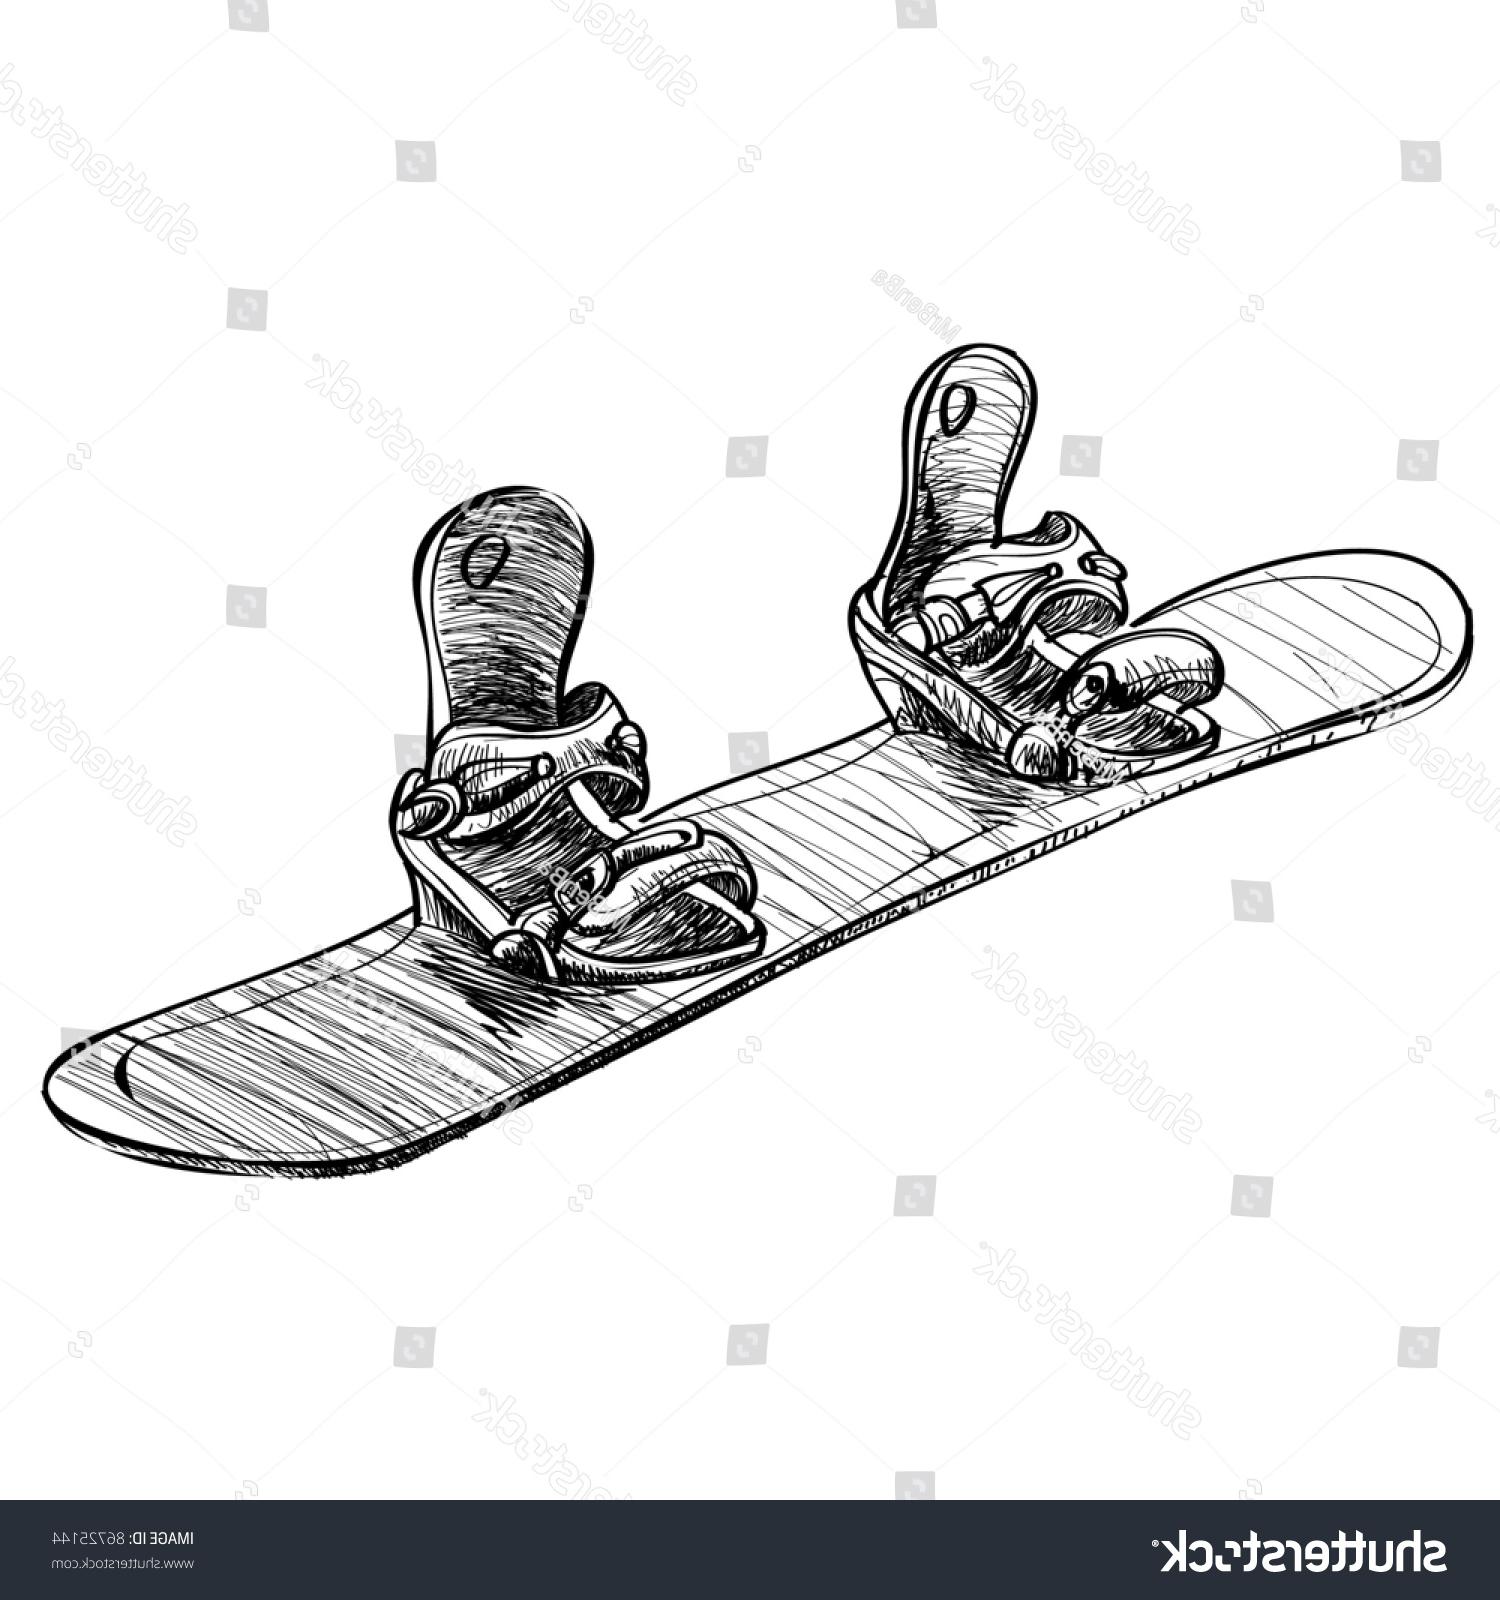 Snowboard Sketch at Explore collection of